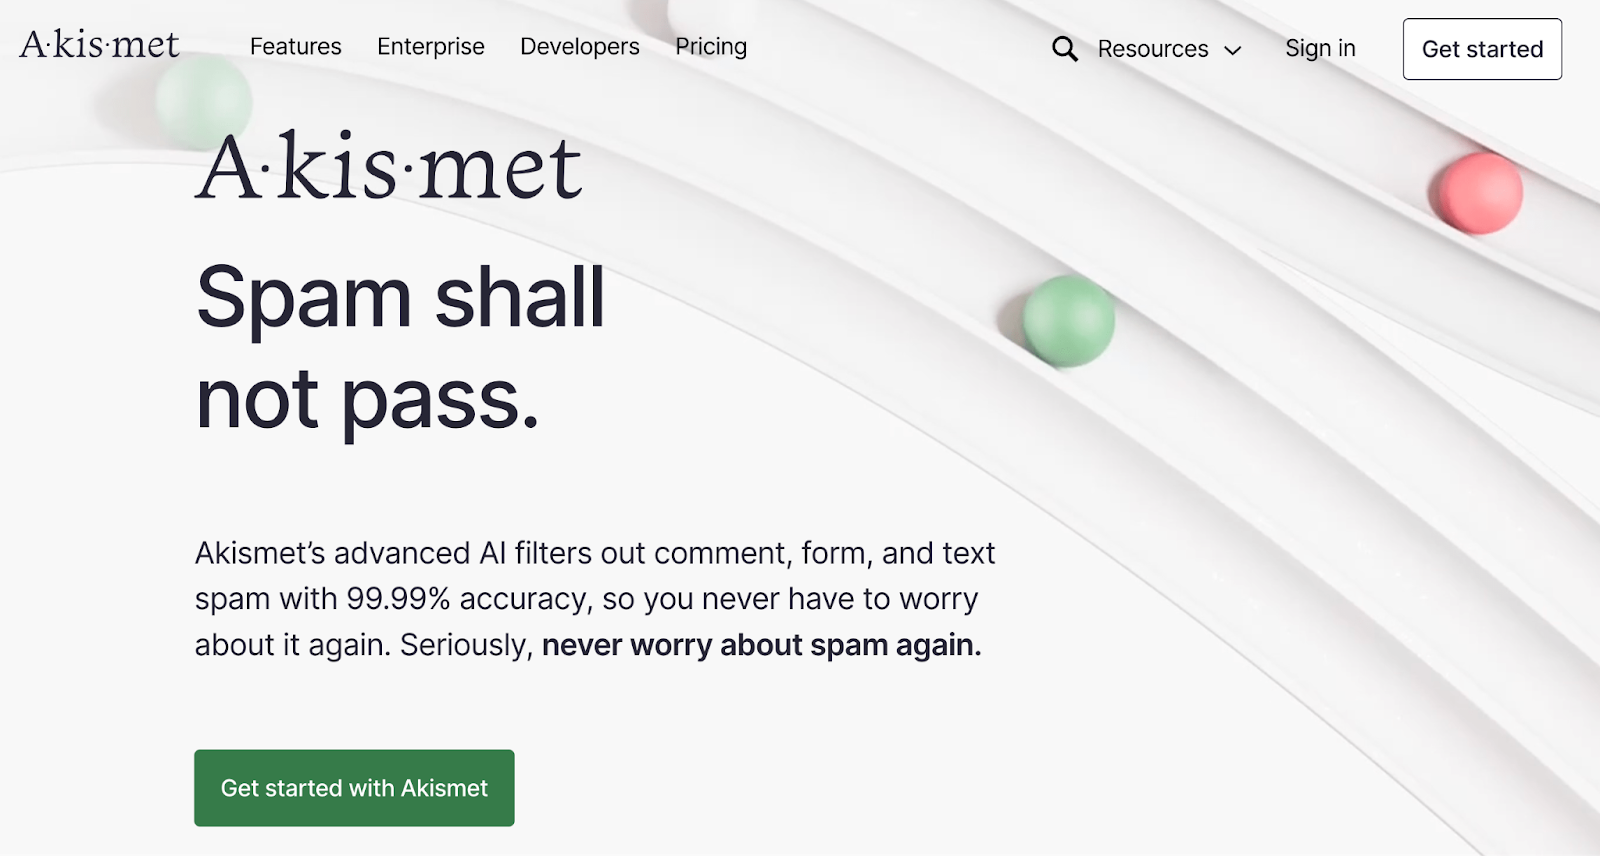 Akismet homepage with the tagline "spam shall not pass"